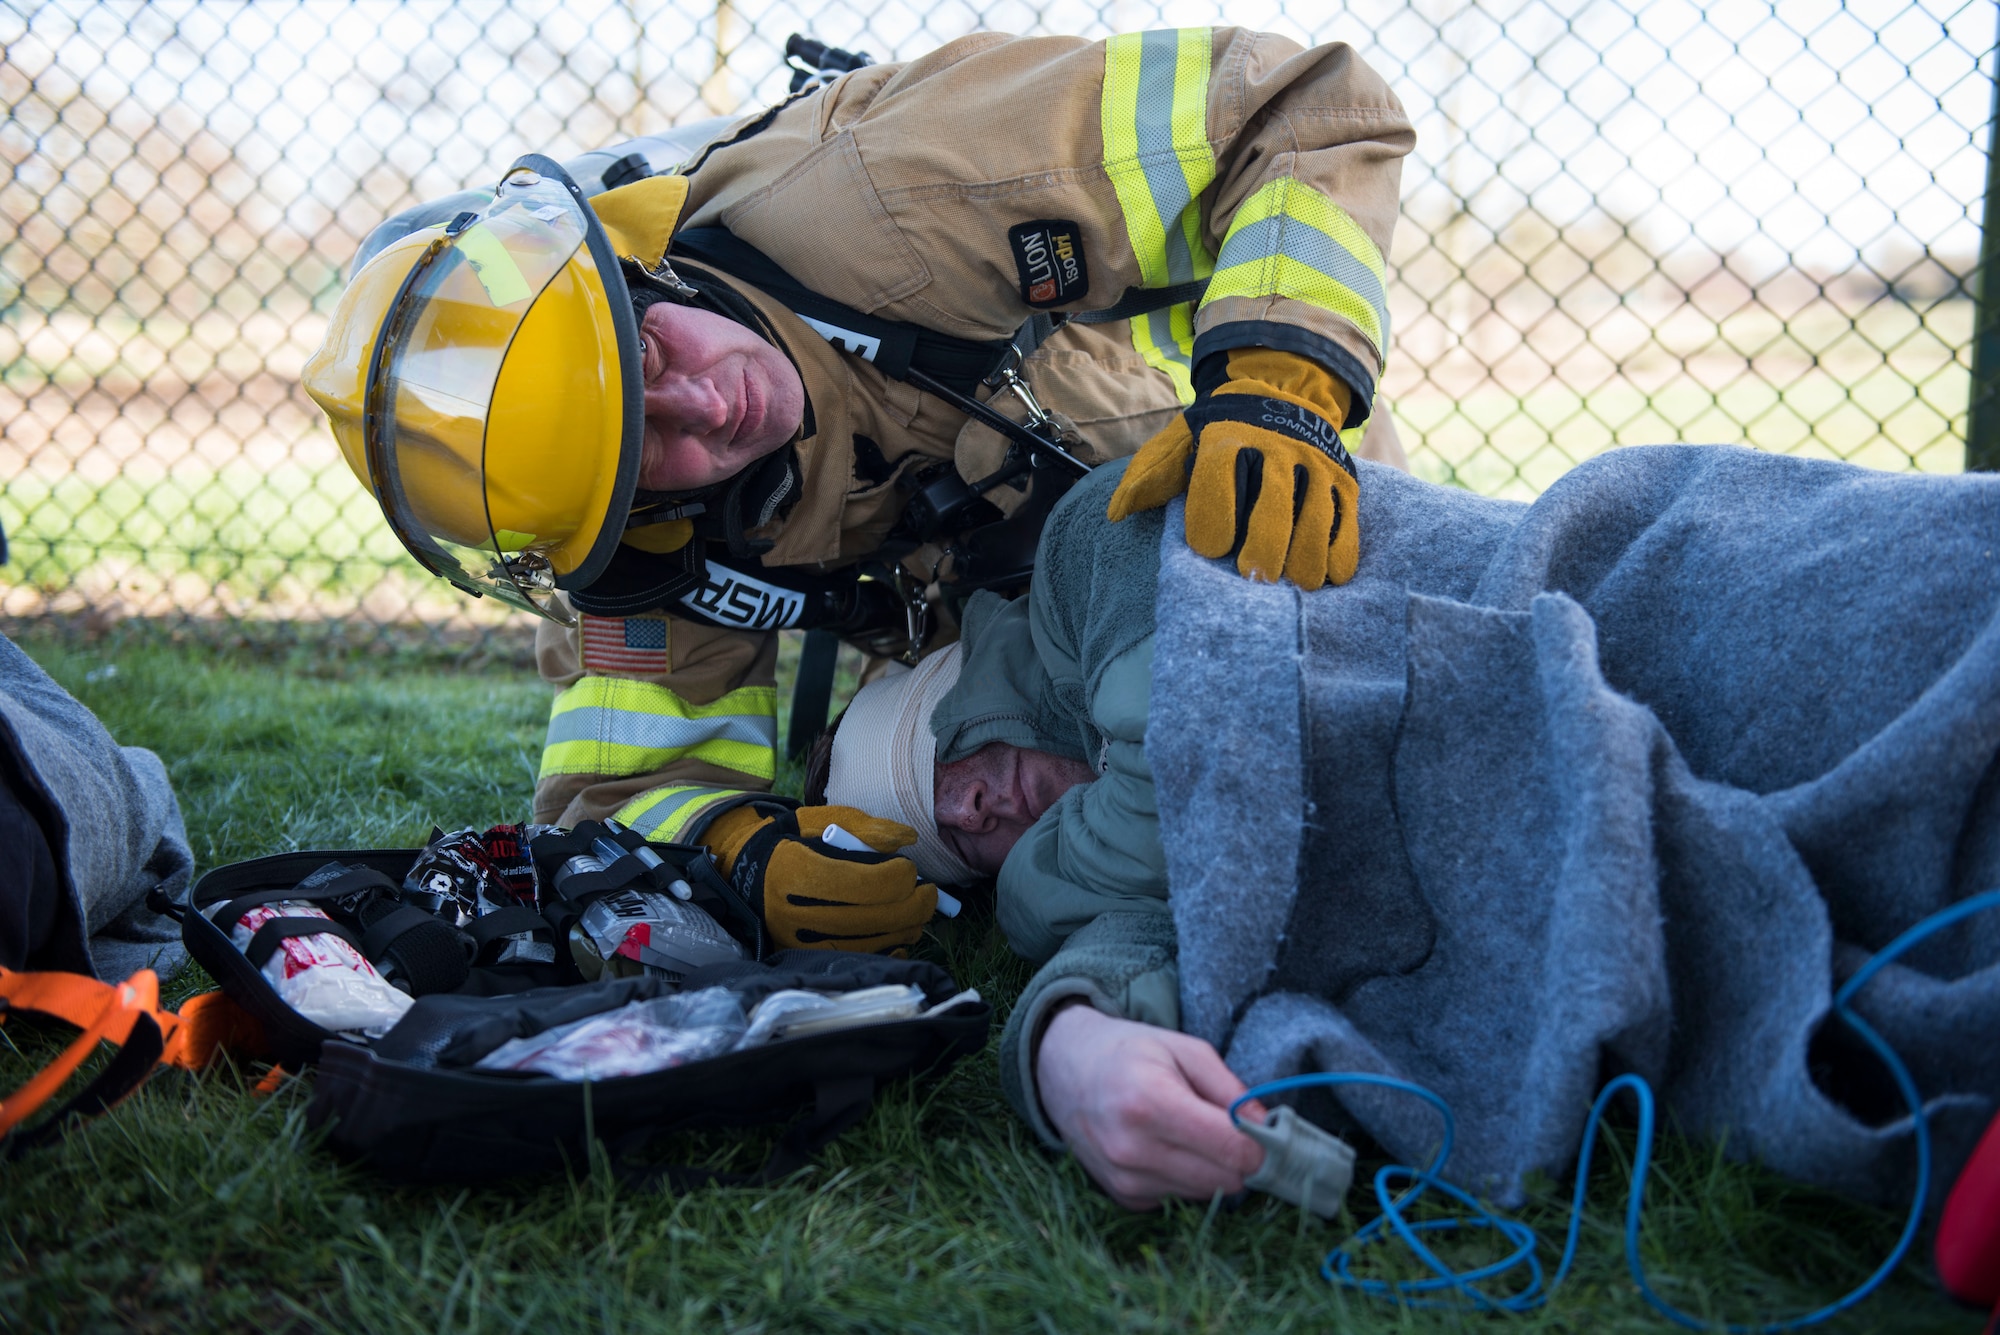 Craig Marsden, 422nd Civil Engineer Squadron firefighter, assists a simulated casualty during the 501st Combat Support Wing Readiness Exercise 20-01 at RAF Croughton, England, Feb. 12, 2020. The exercise tested the wing’s preparedness and response capabilities to an emergency situation. (U.S. Air Force photo by Airman 1st Class Jennifer Zima)